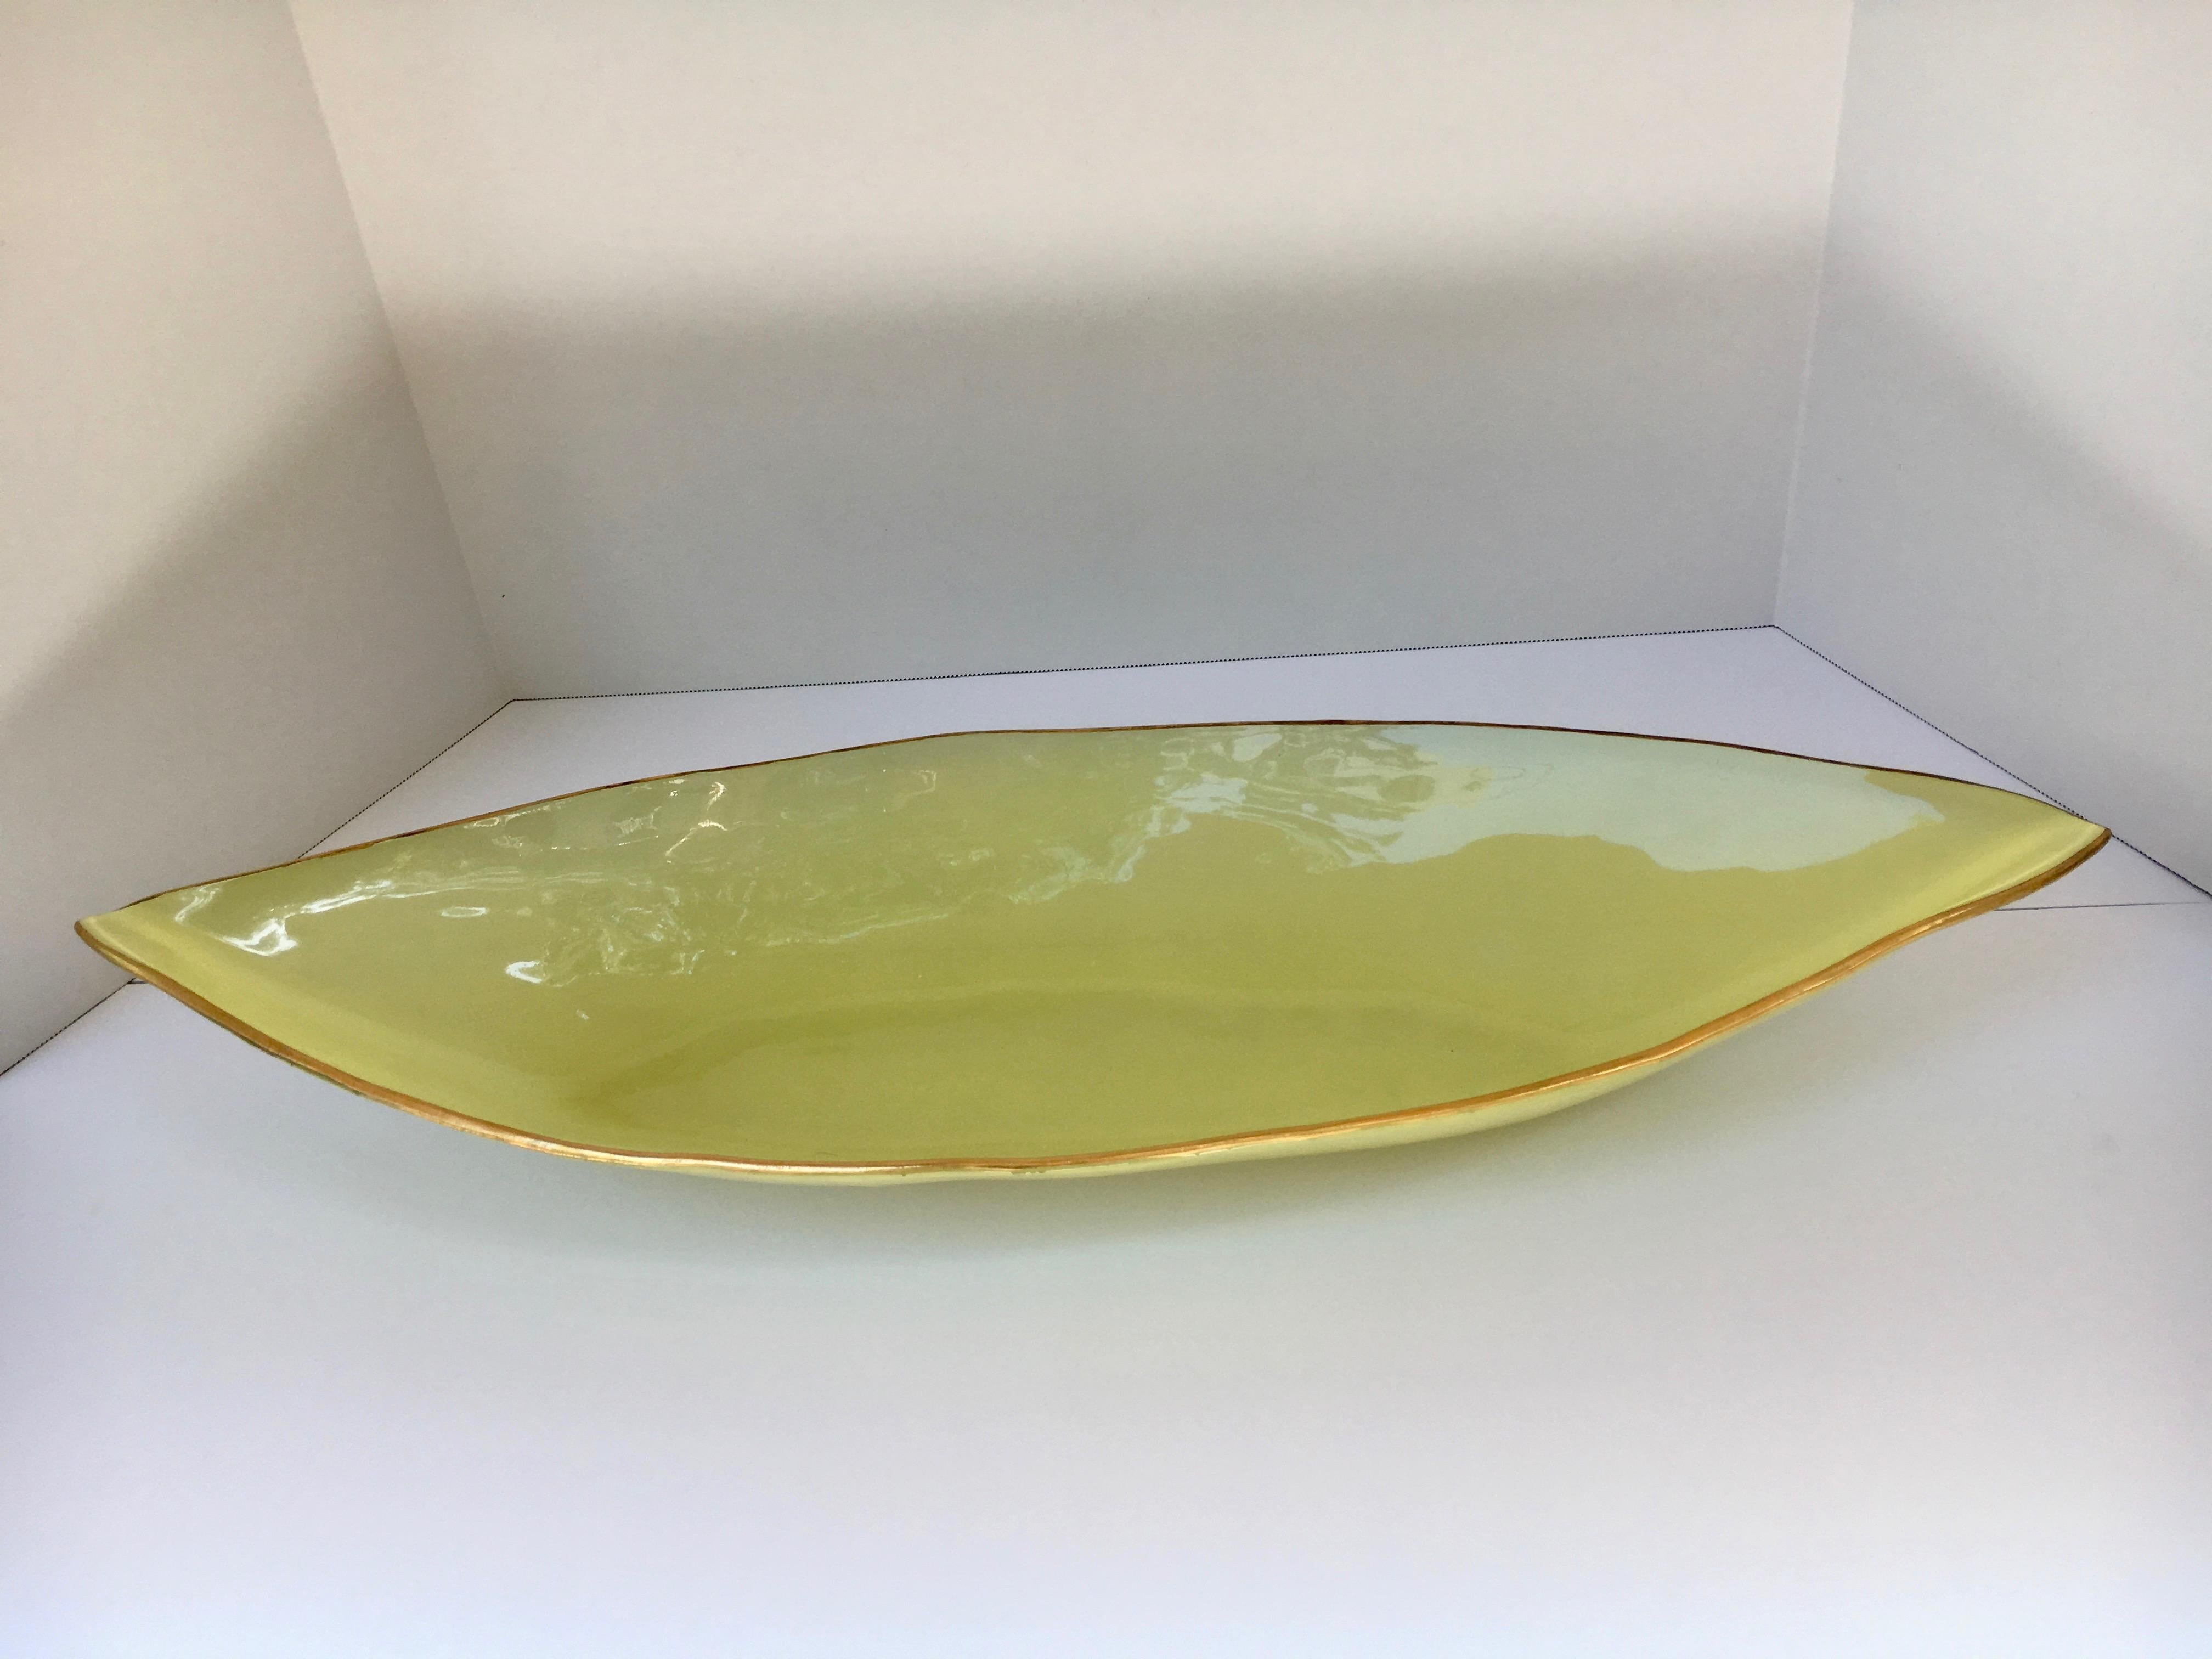 Yellow art glass bowl, yellow bowl with hand-painted gold trim, uses from food to decorative, unique oblong shape well suited for the elongated dining table.